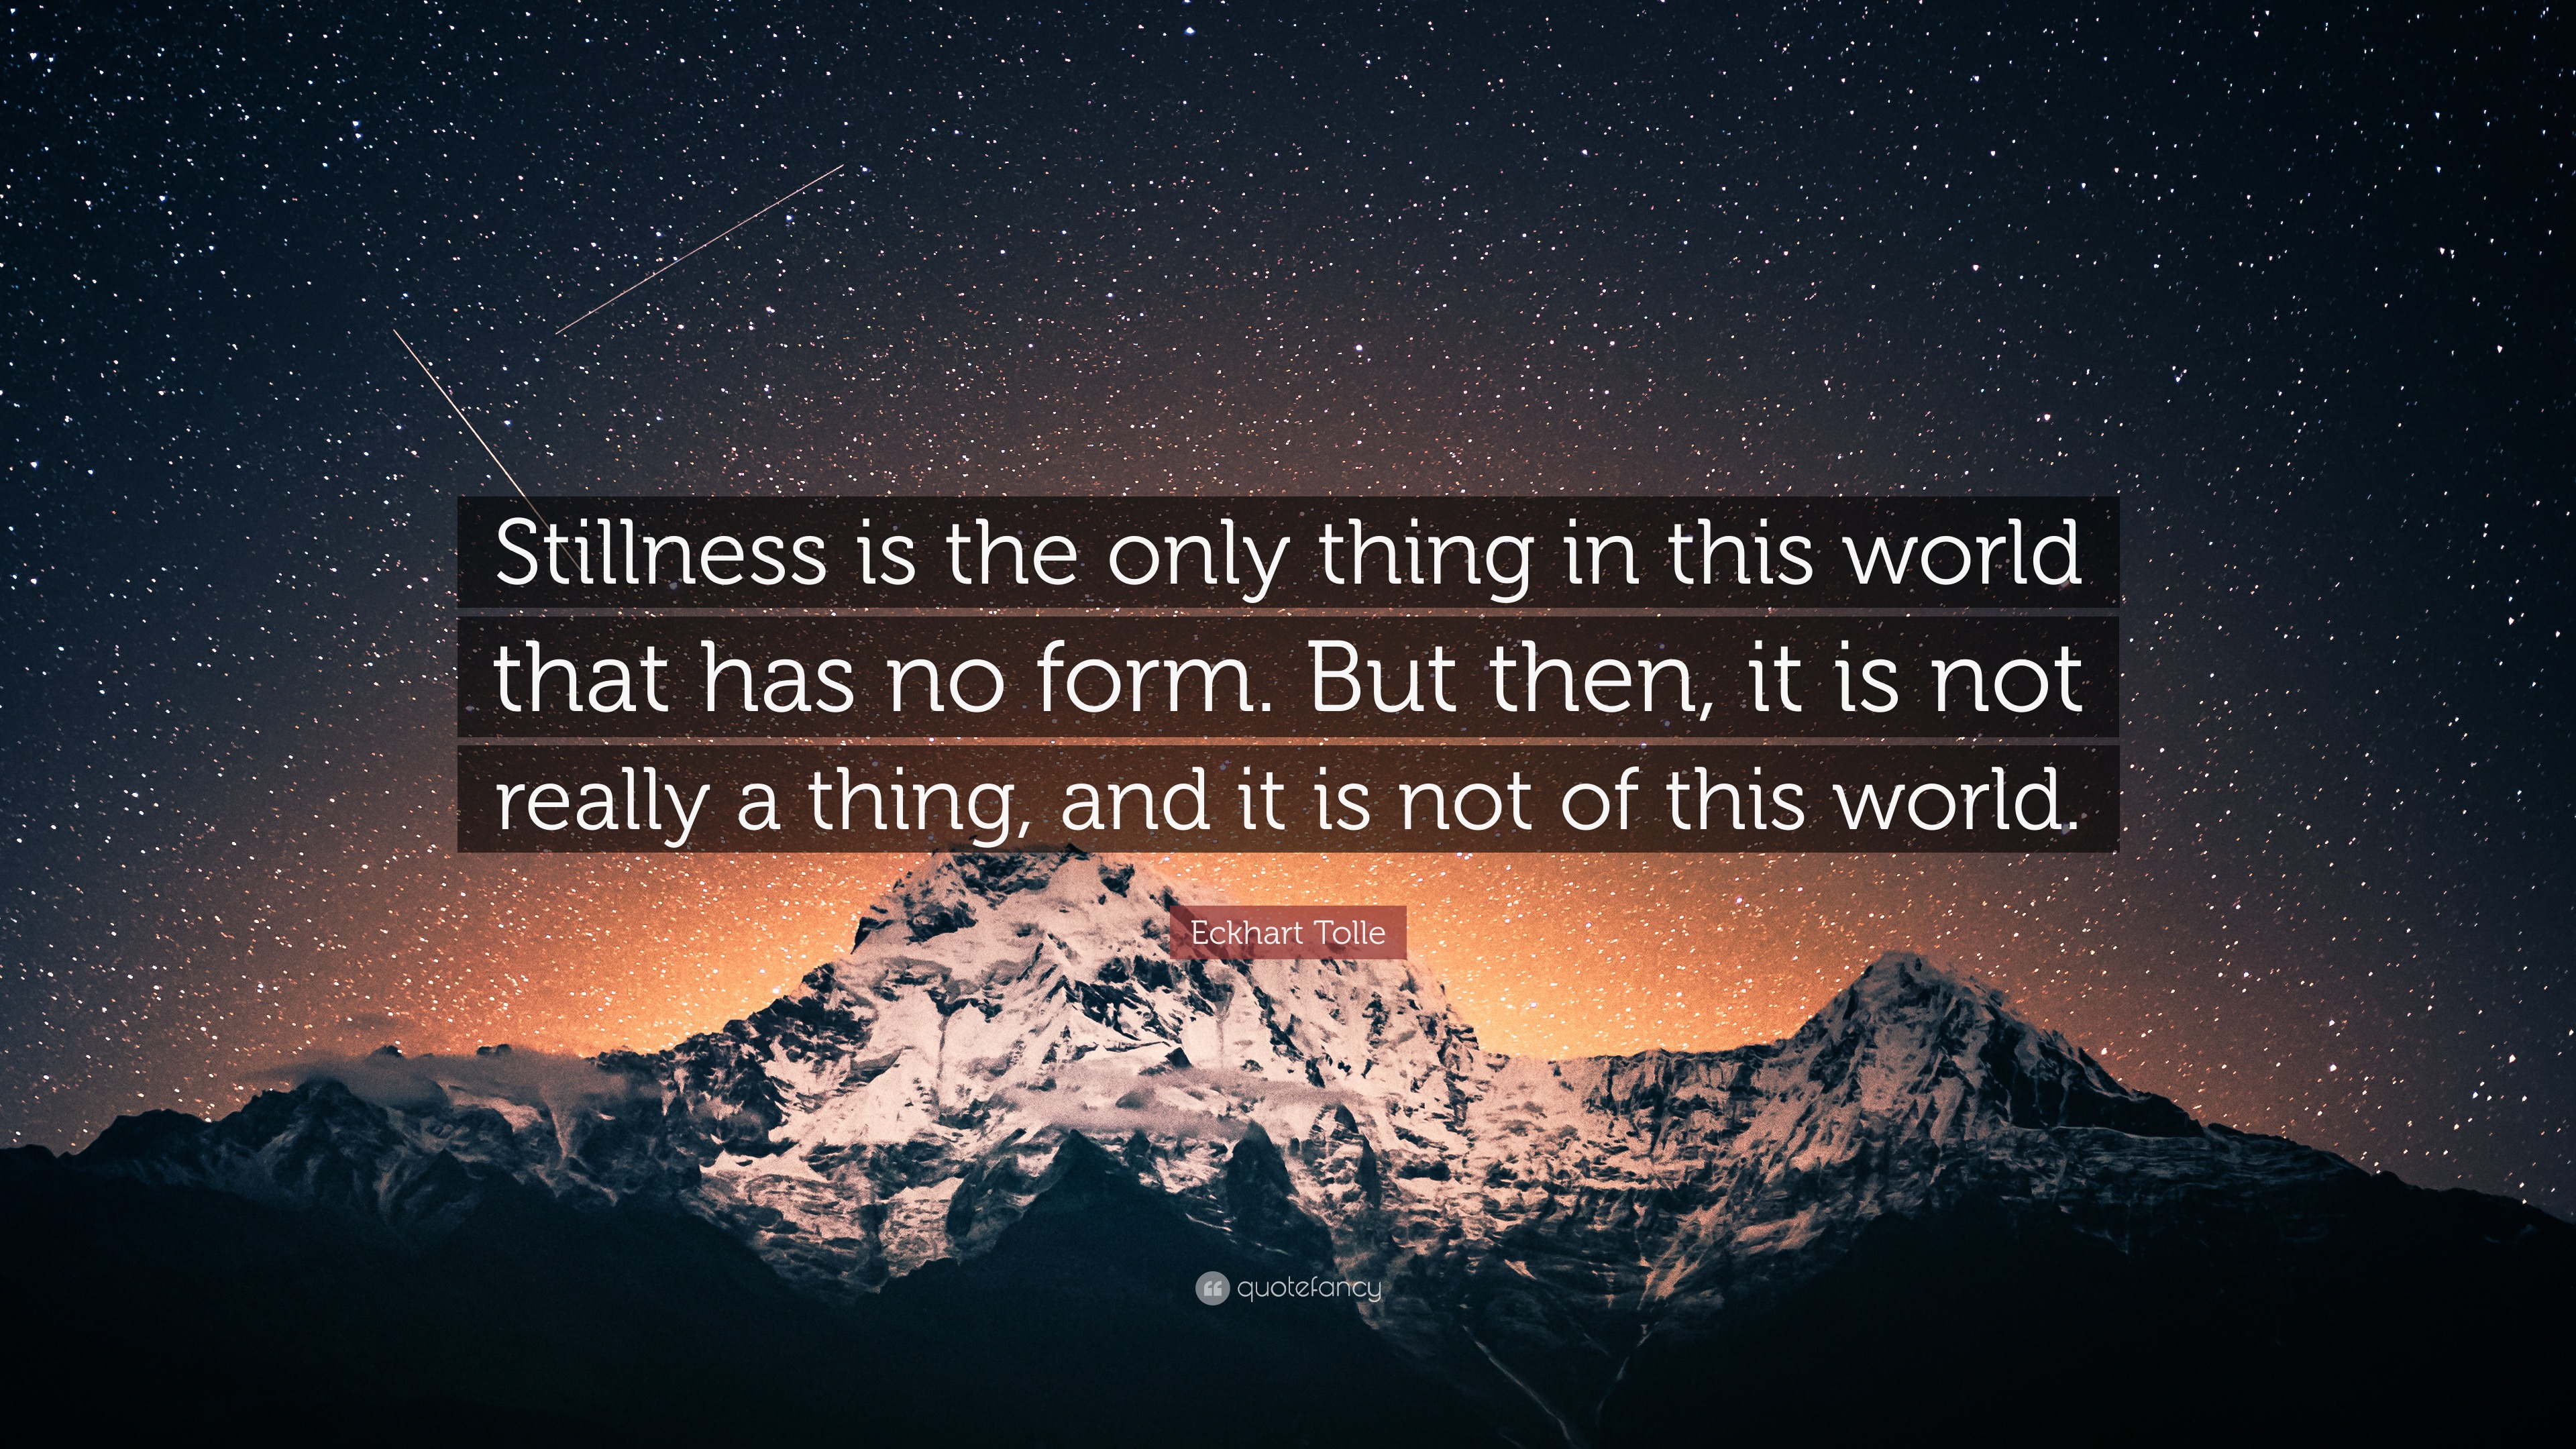 Eckhart Tolle Quote: “Stillness is the only thing in this world that